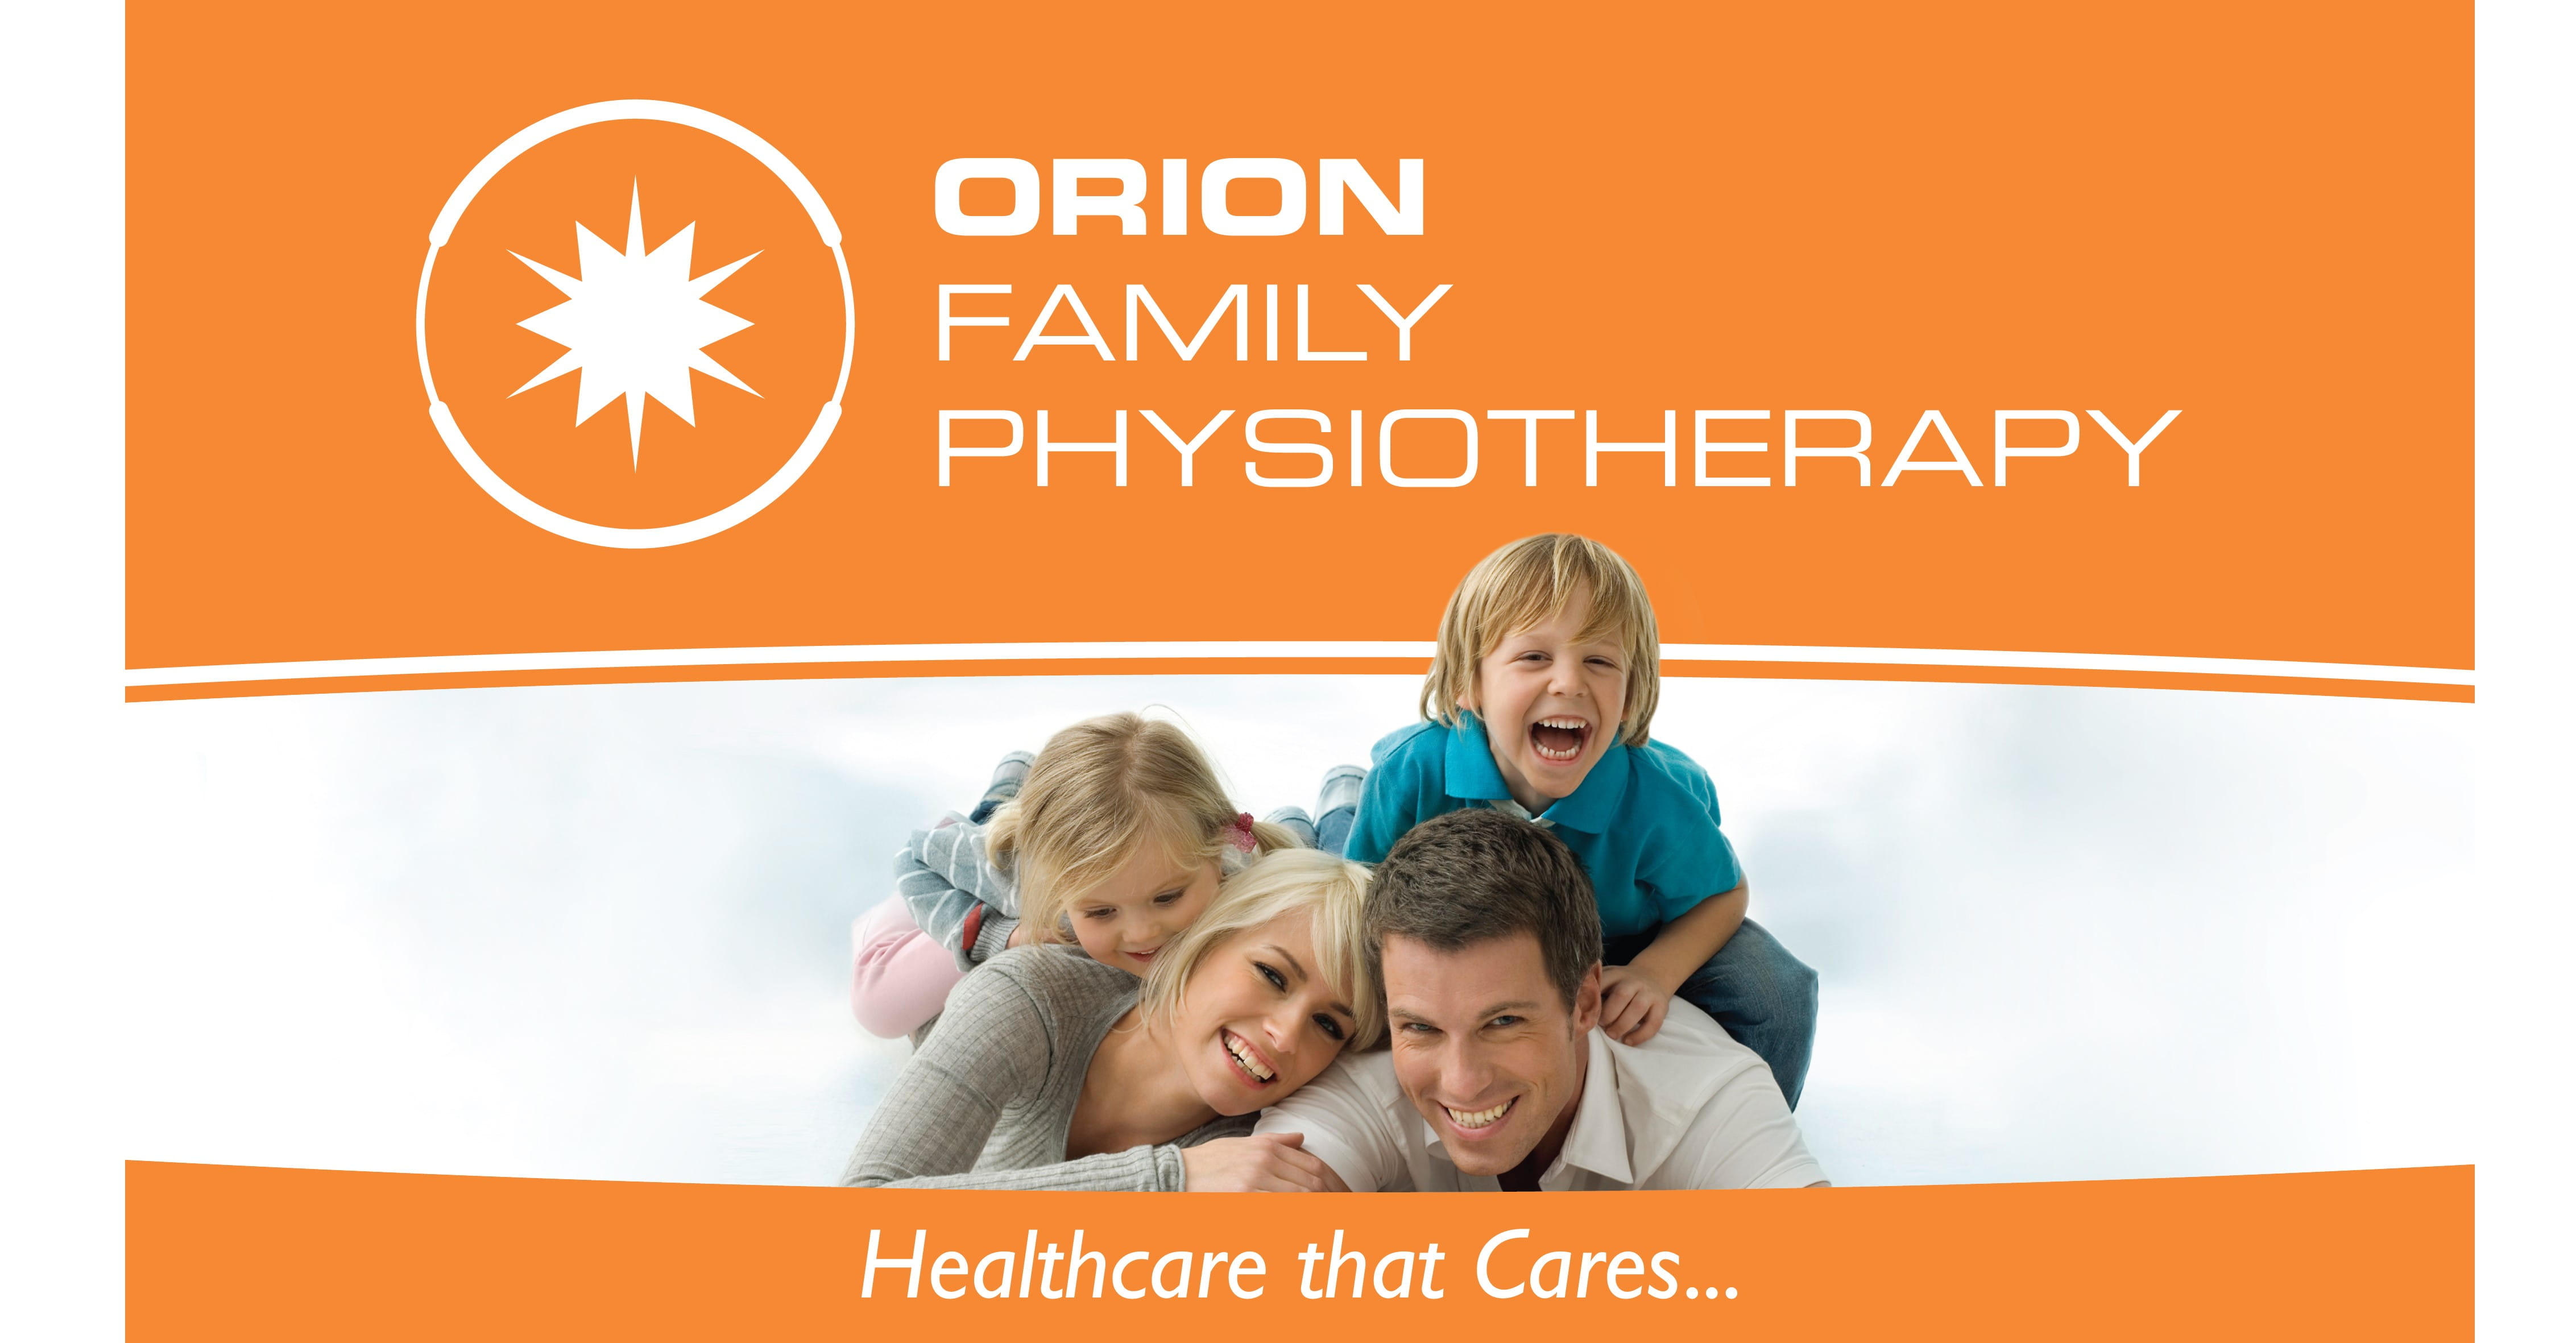 Orion Family Physiotherapy